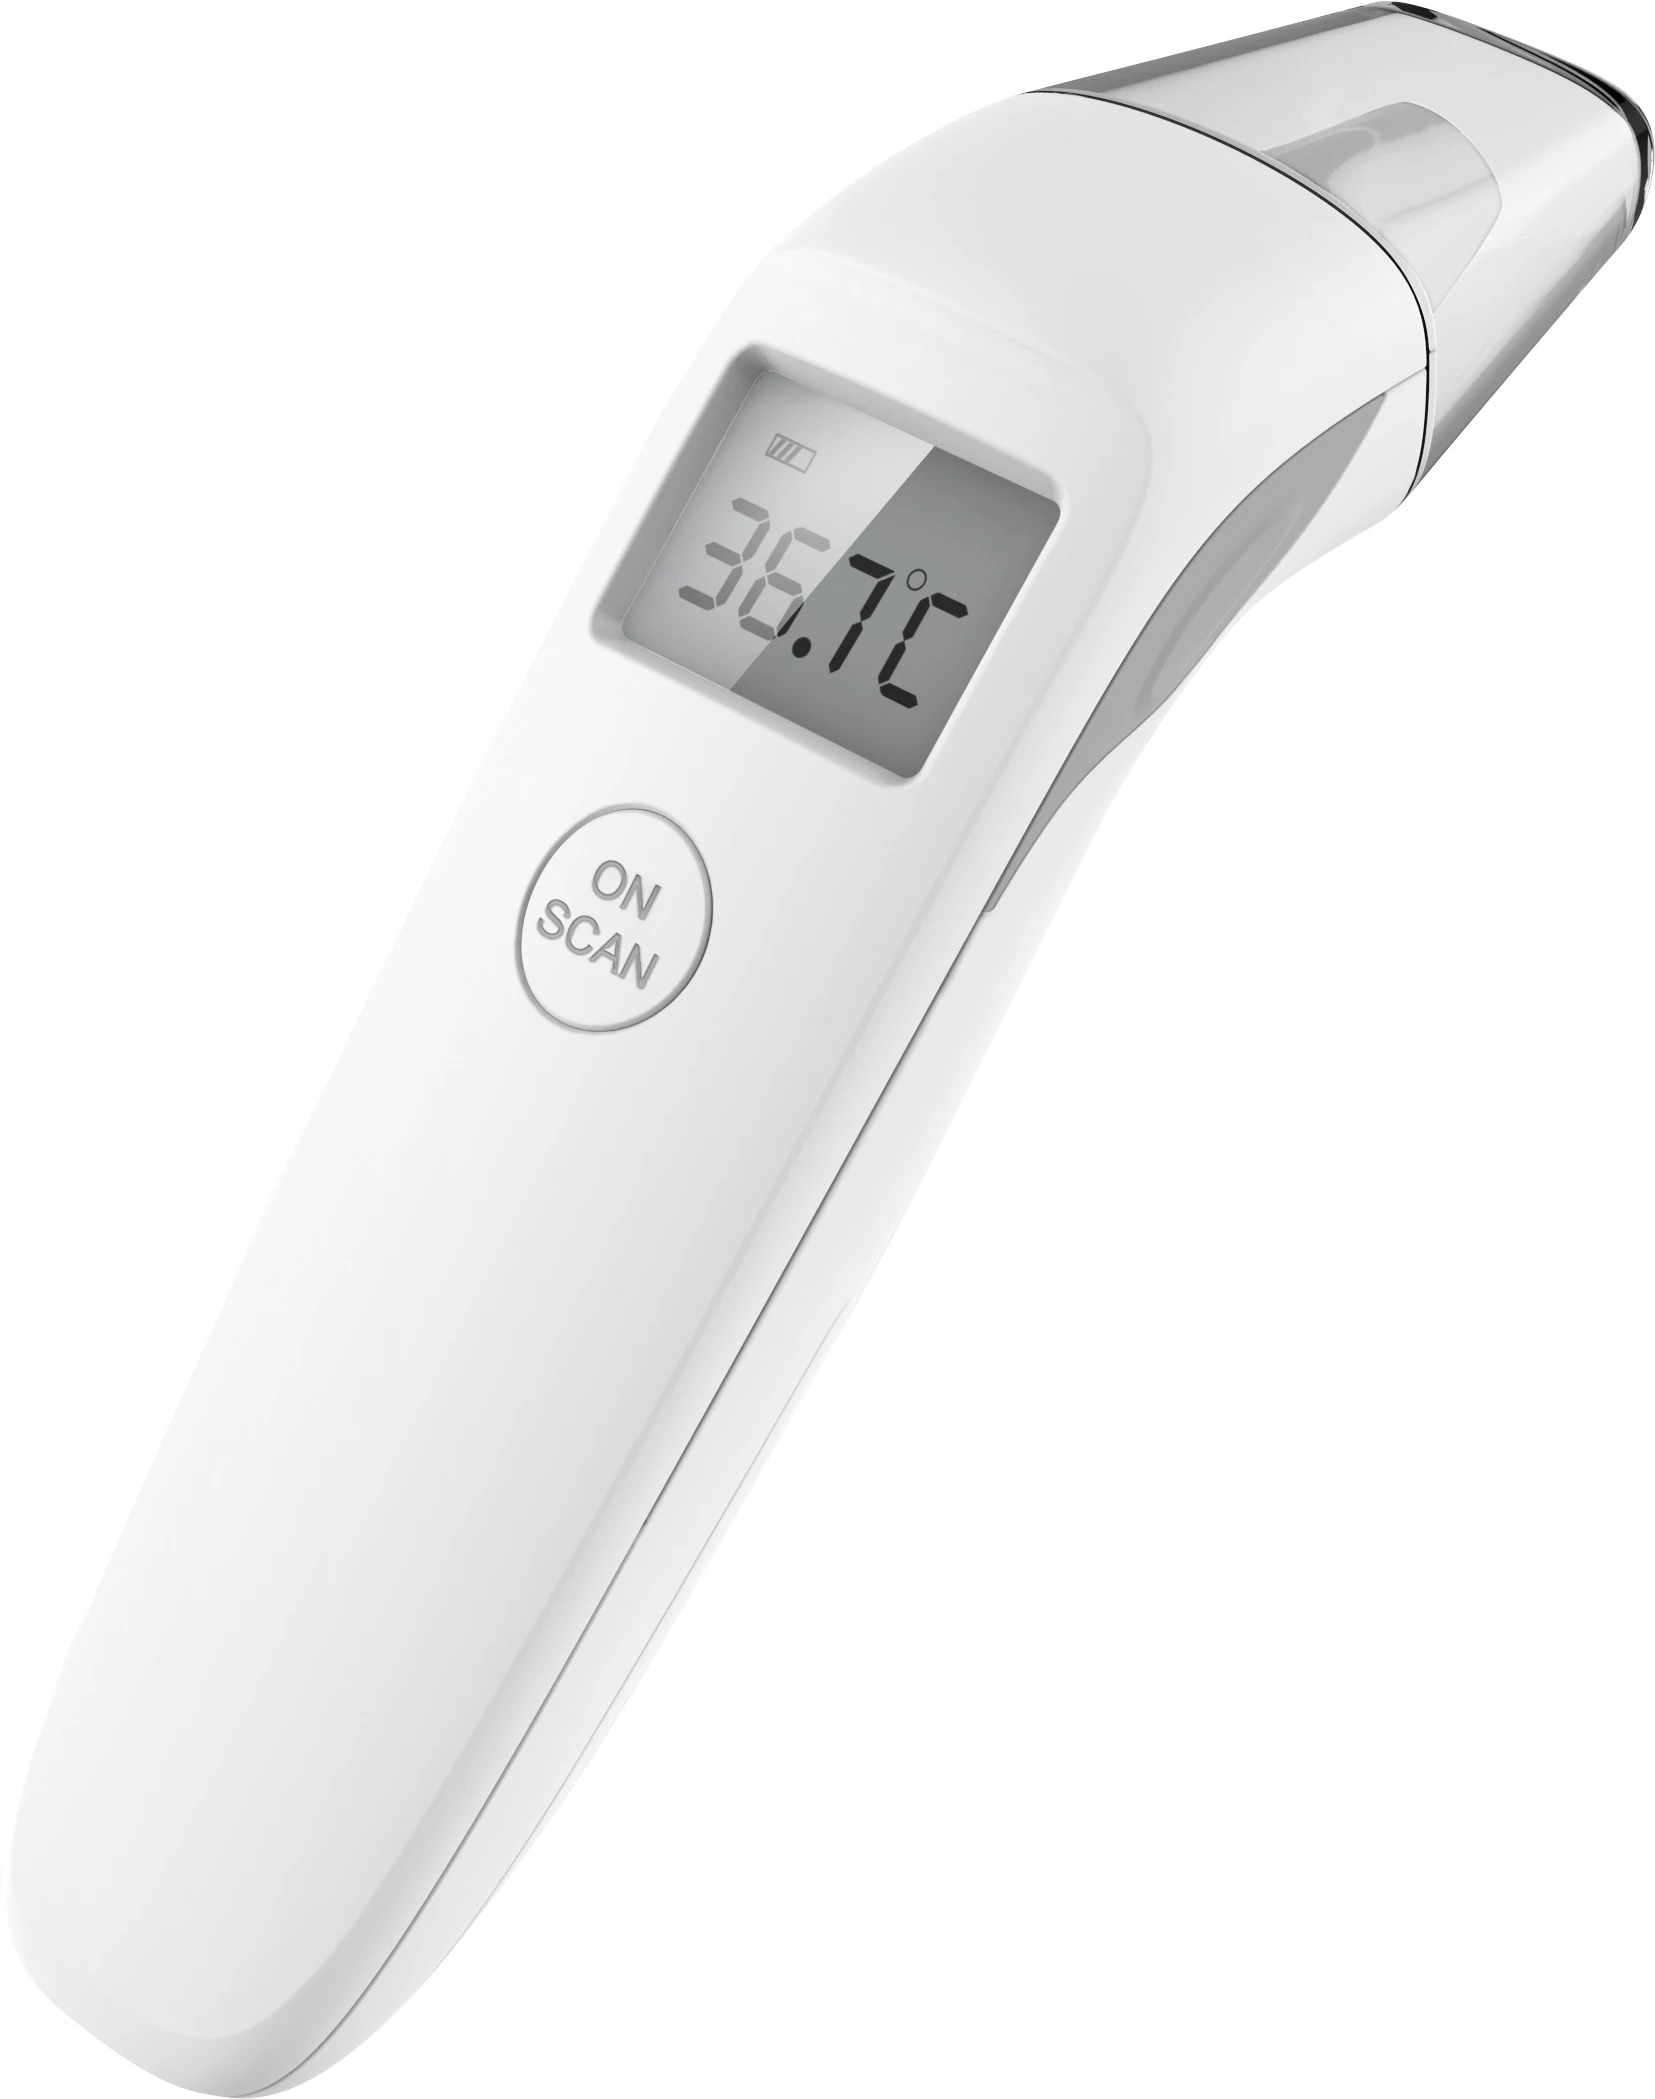 medical laser digital non-contact no touch thermometer infrared forehead temperature heat gun